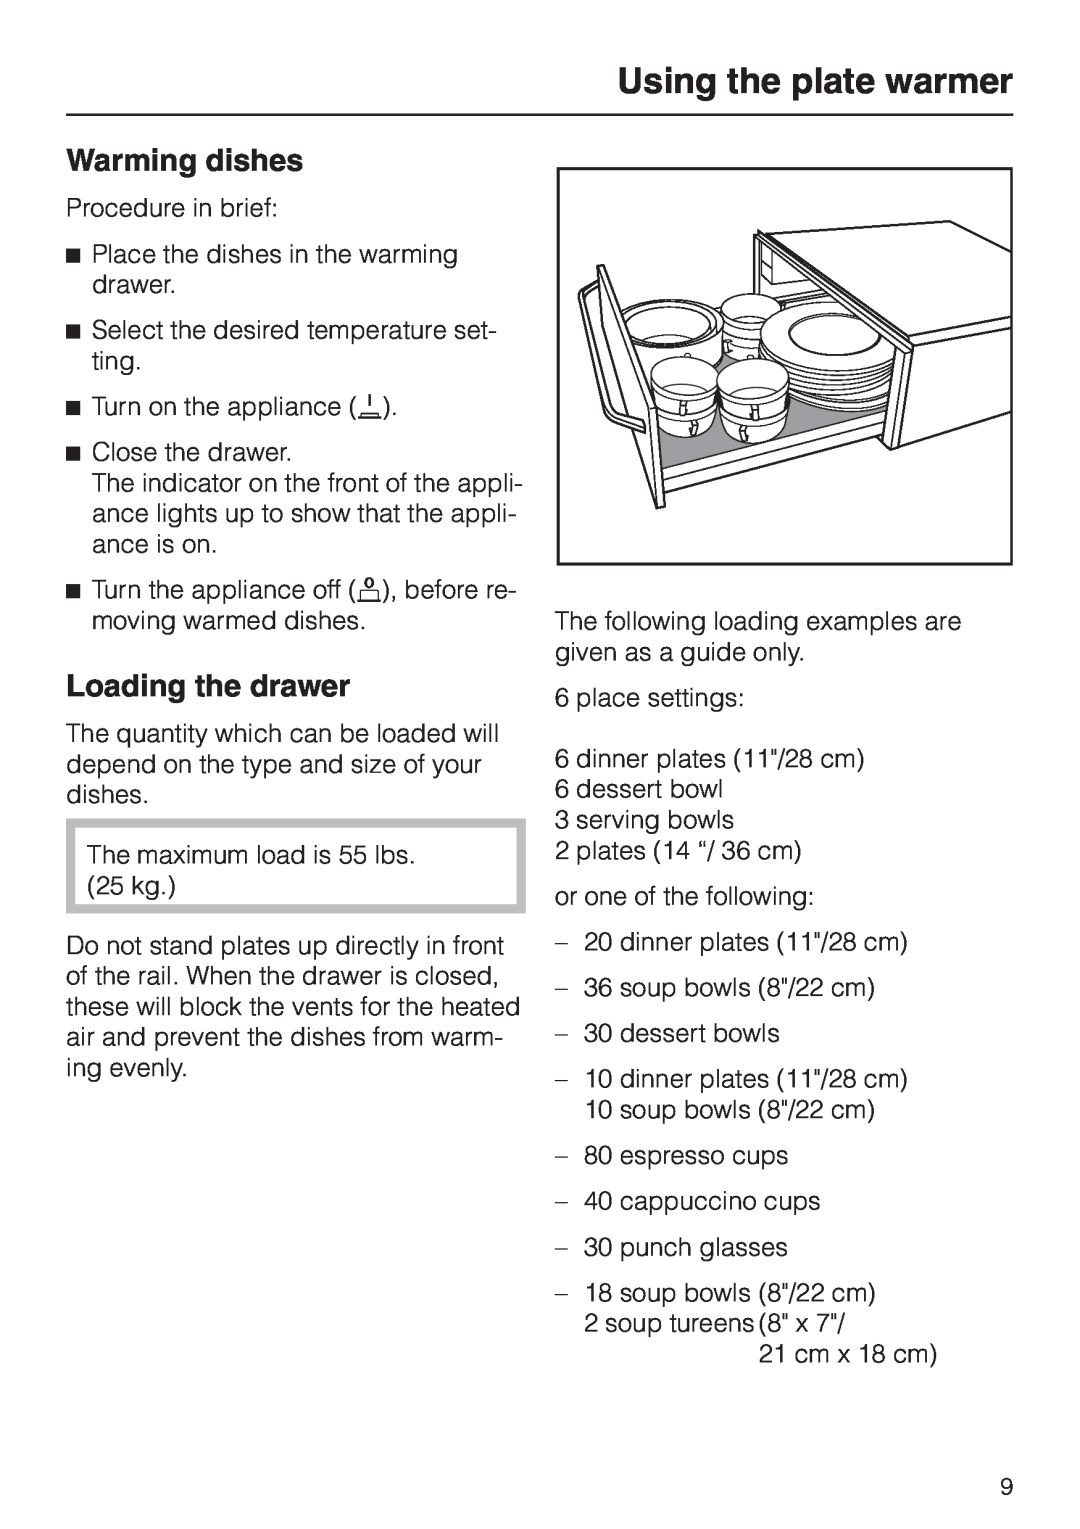 Miele EGW602-14 installation instructions Warming dishes, Loading the drawer, Using the plate warmer 